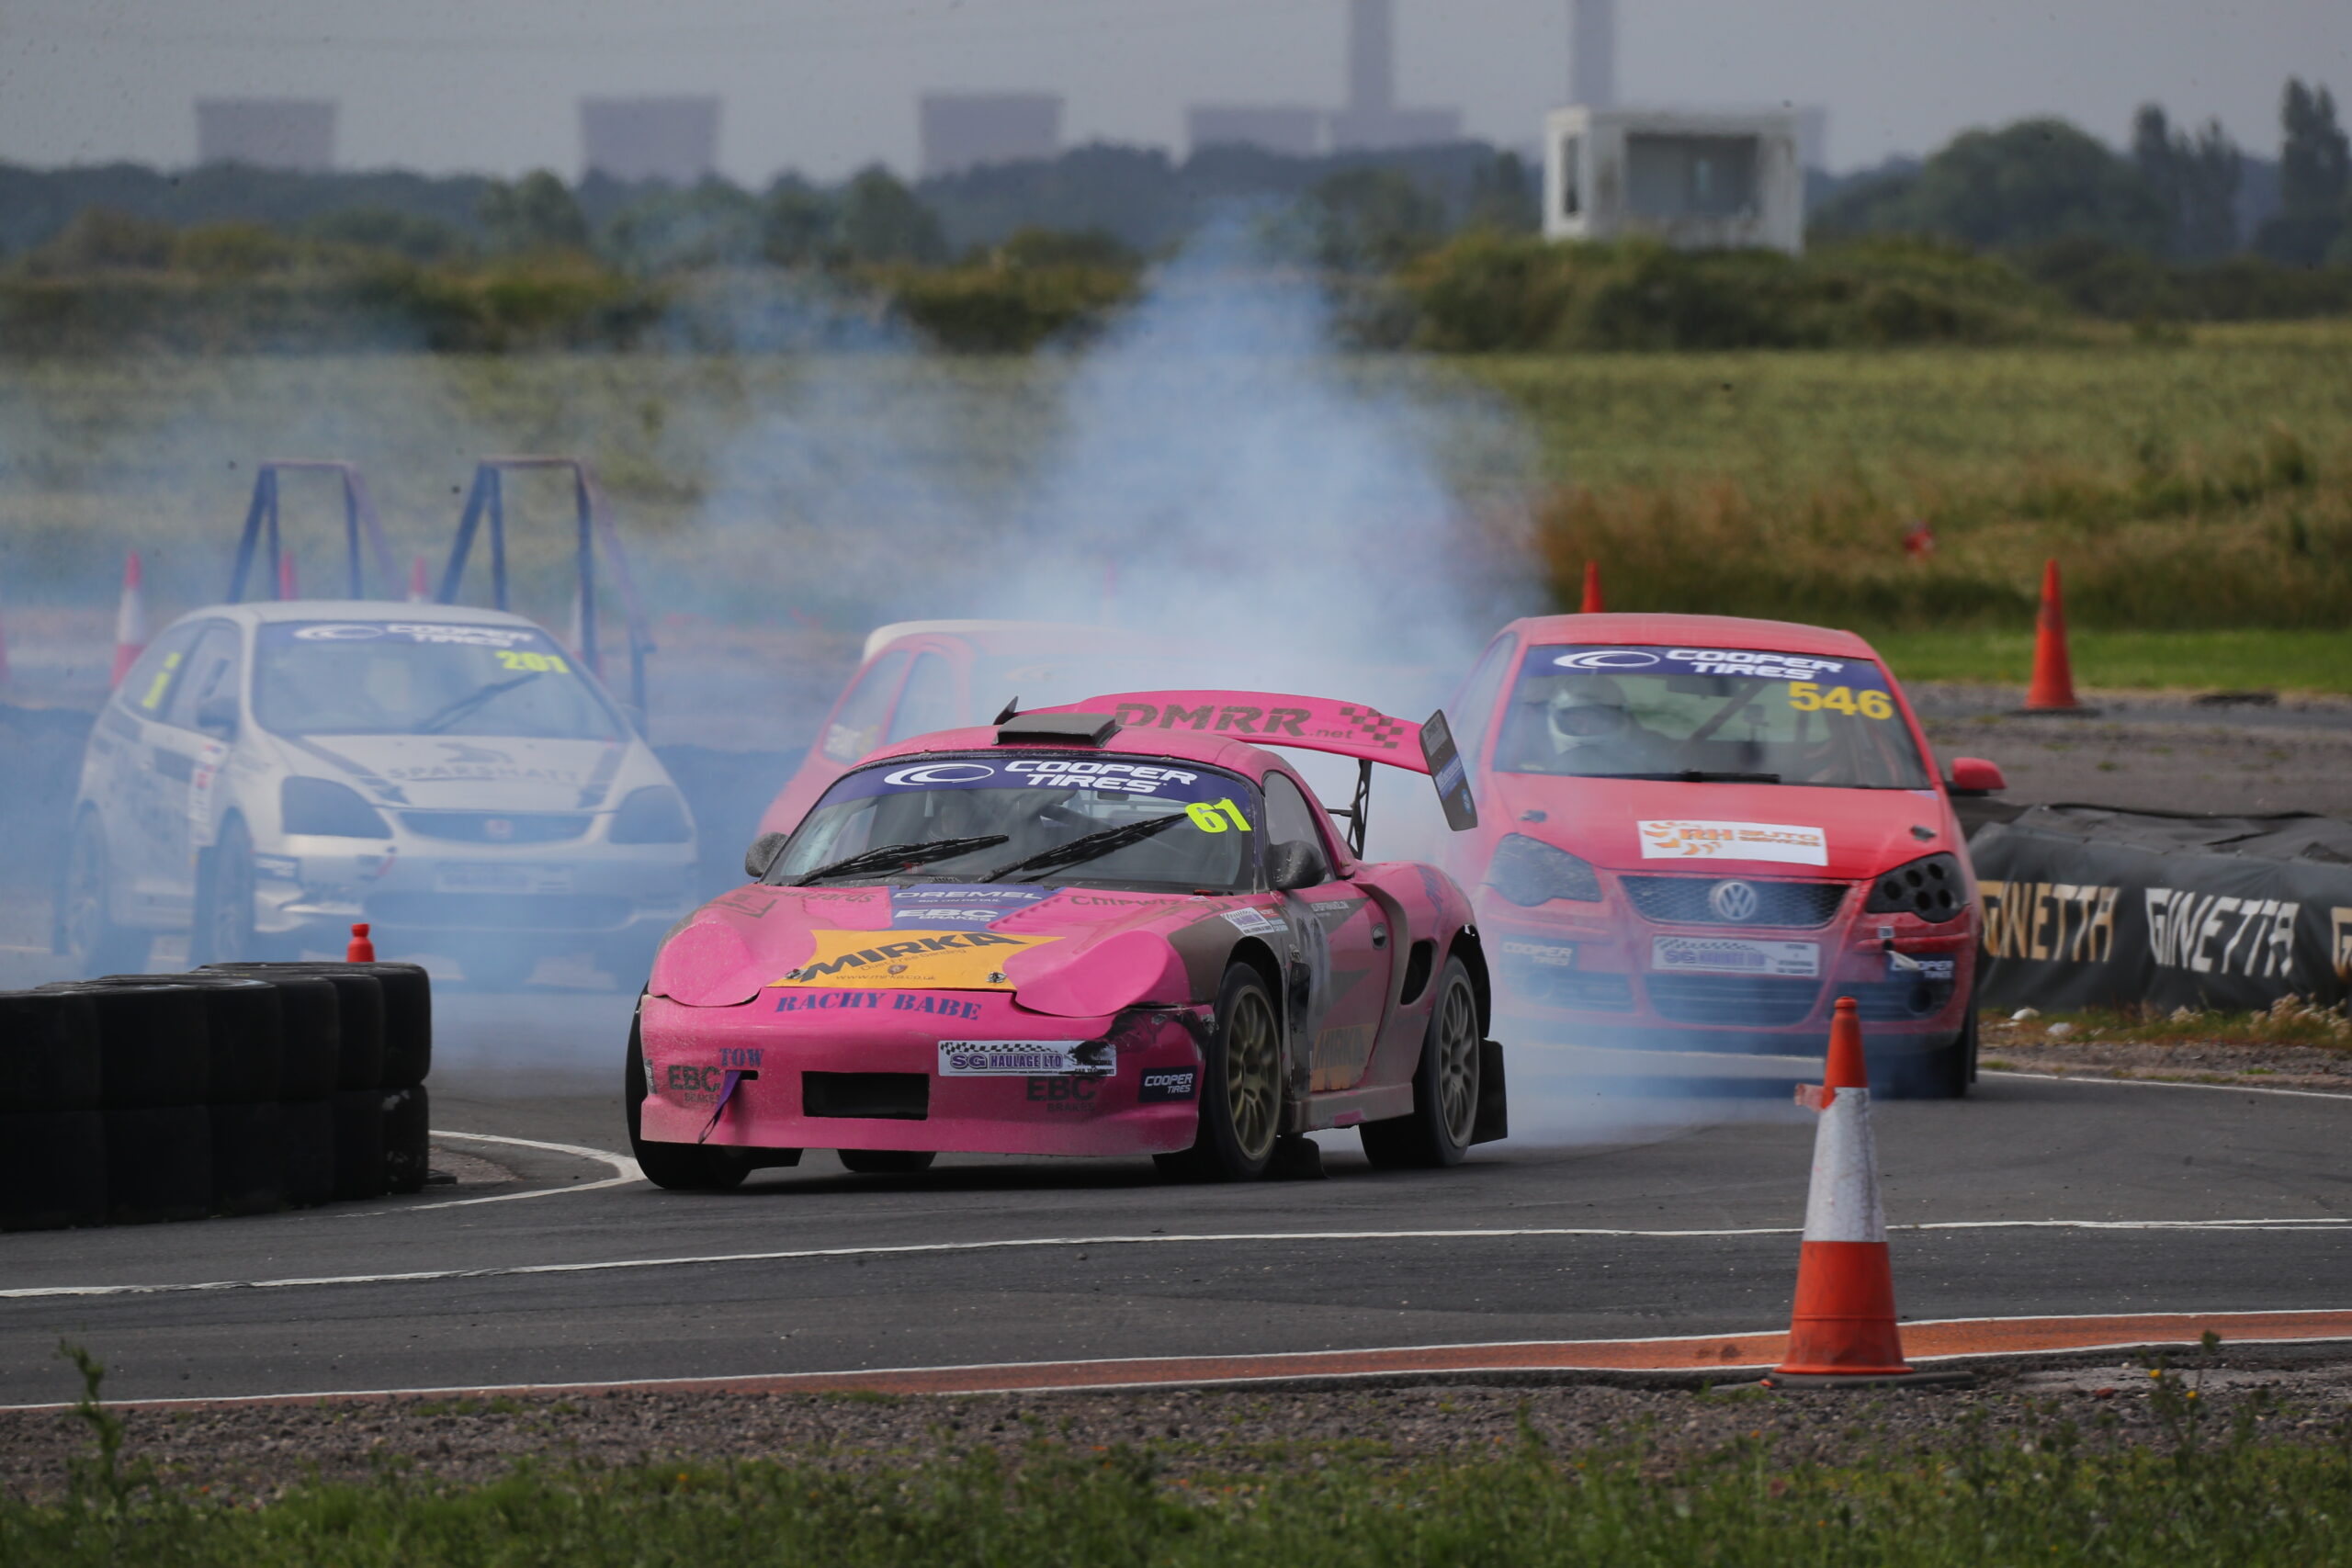 EBC-Equipped Rallycross Championship Team Experience Thrills and Spills at Blyton